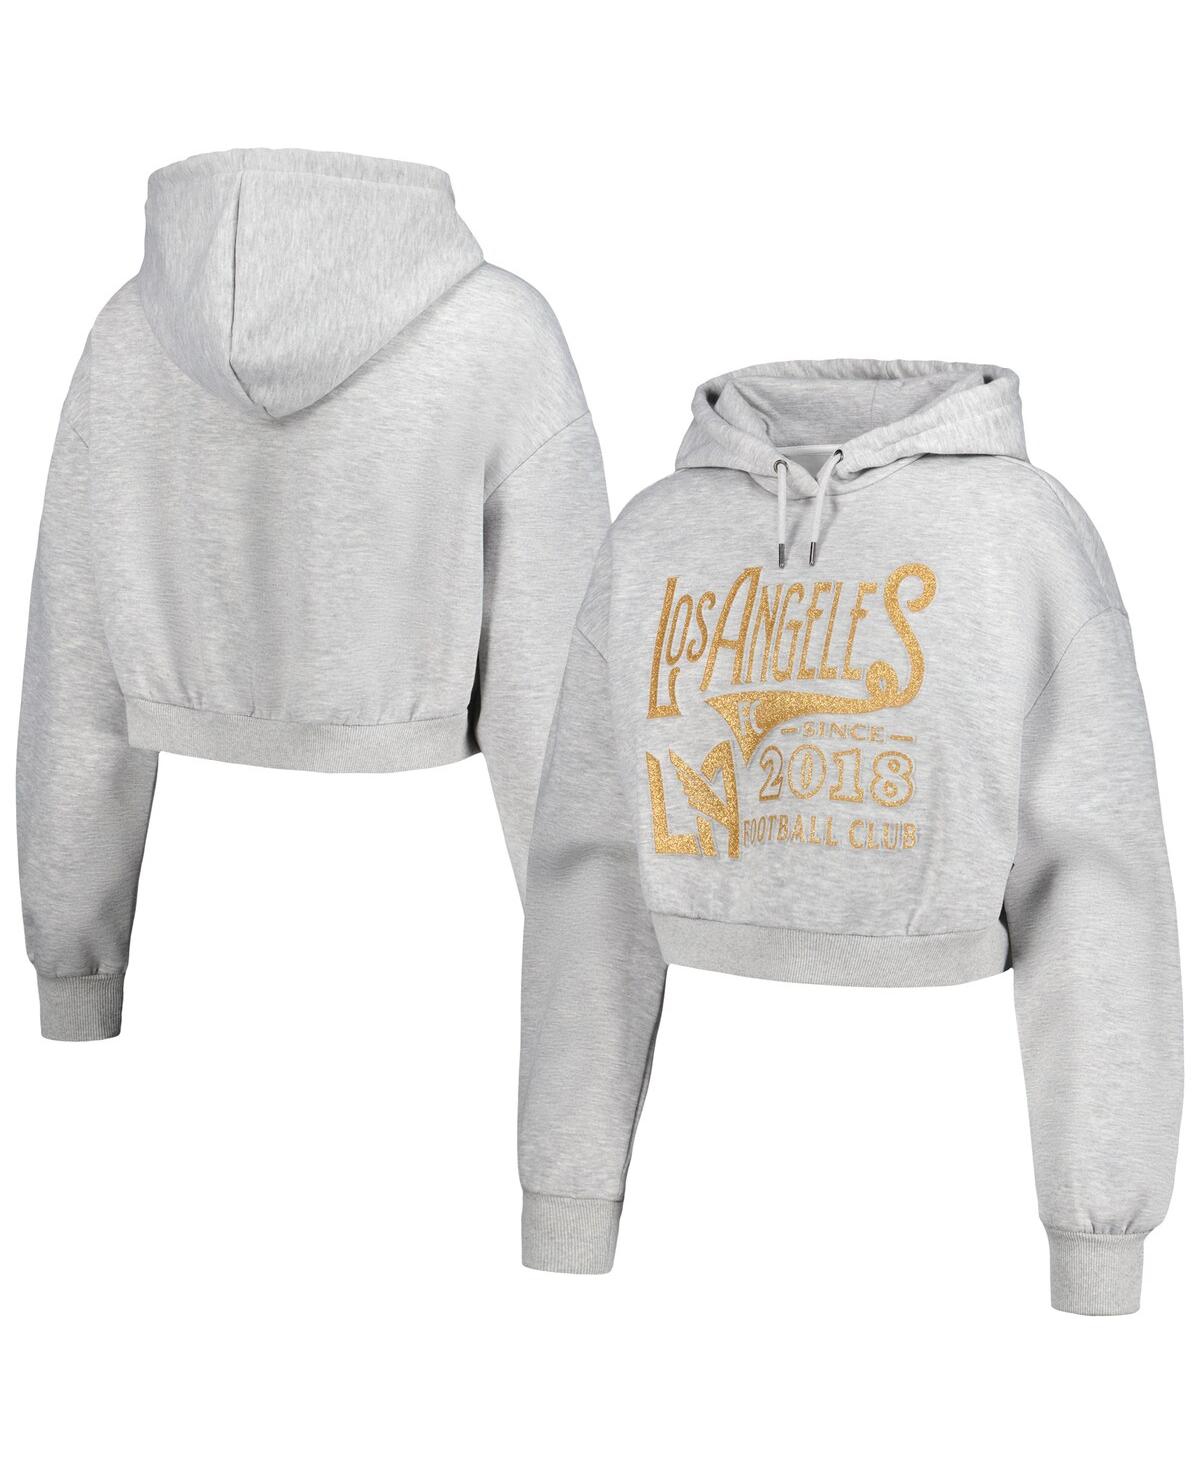 Shop The Wild Collective Women's  Heather Gray Lafc Cropped Pullover Hoodie